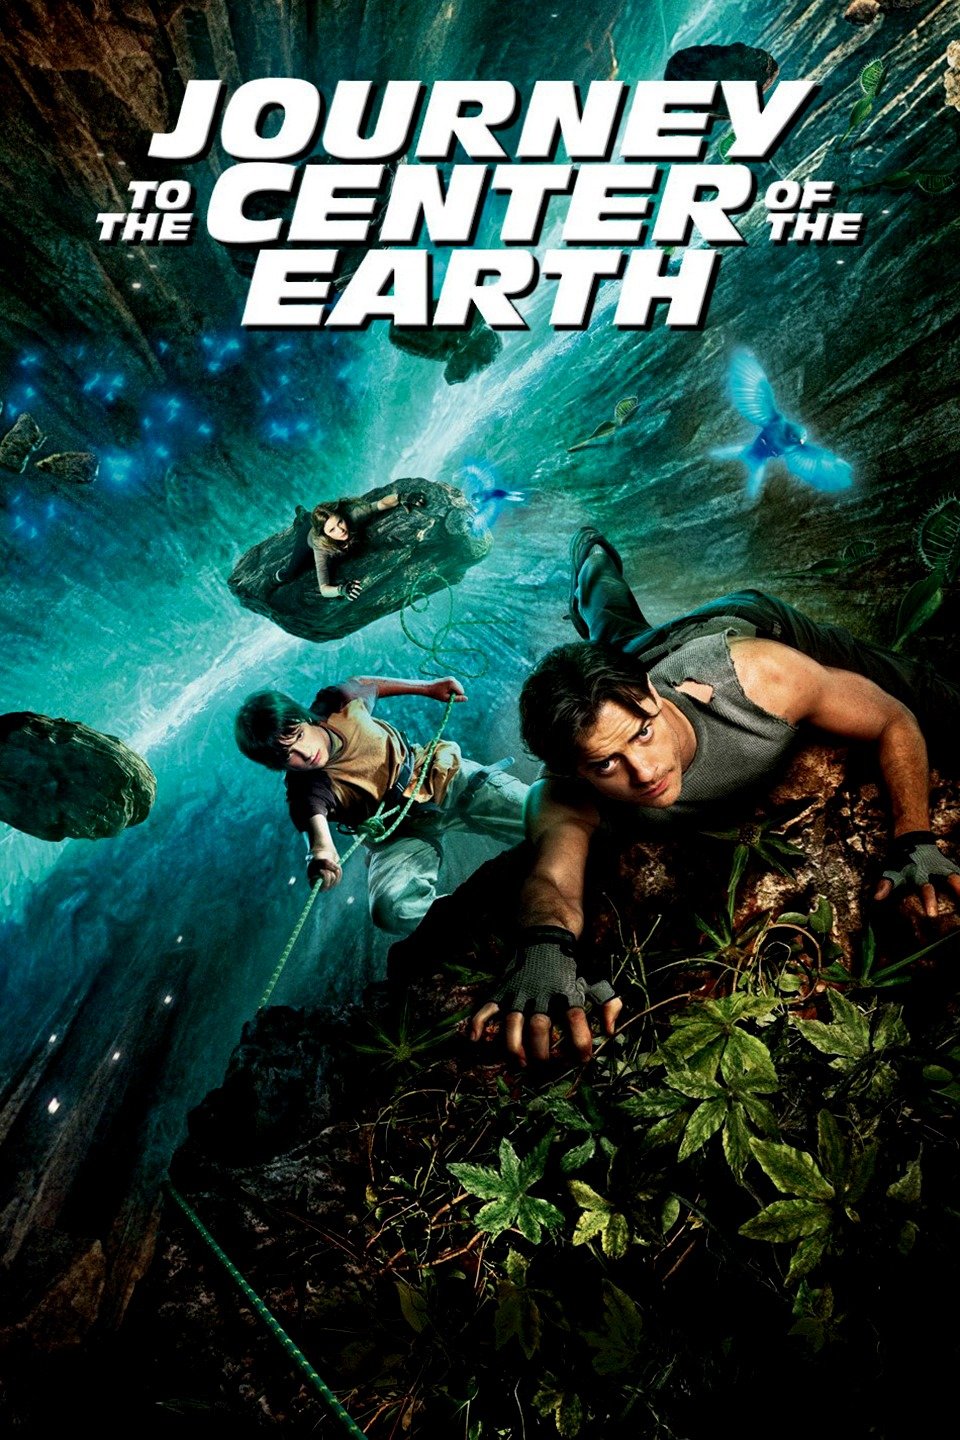 Download journey to the center of the earth in hindi 720p worldfree4u